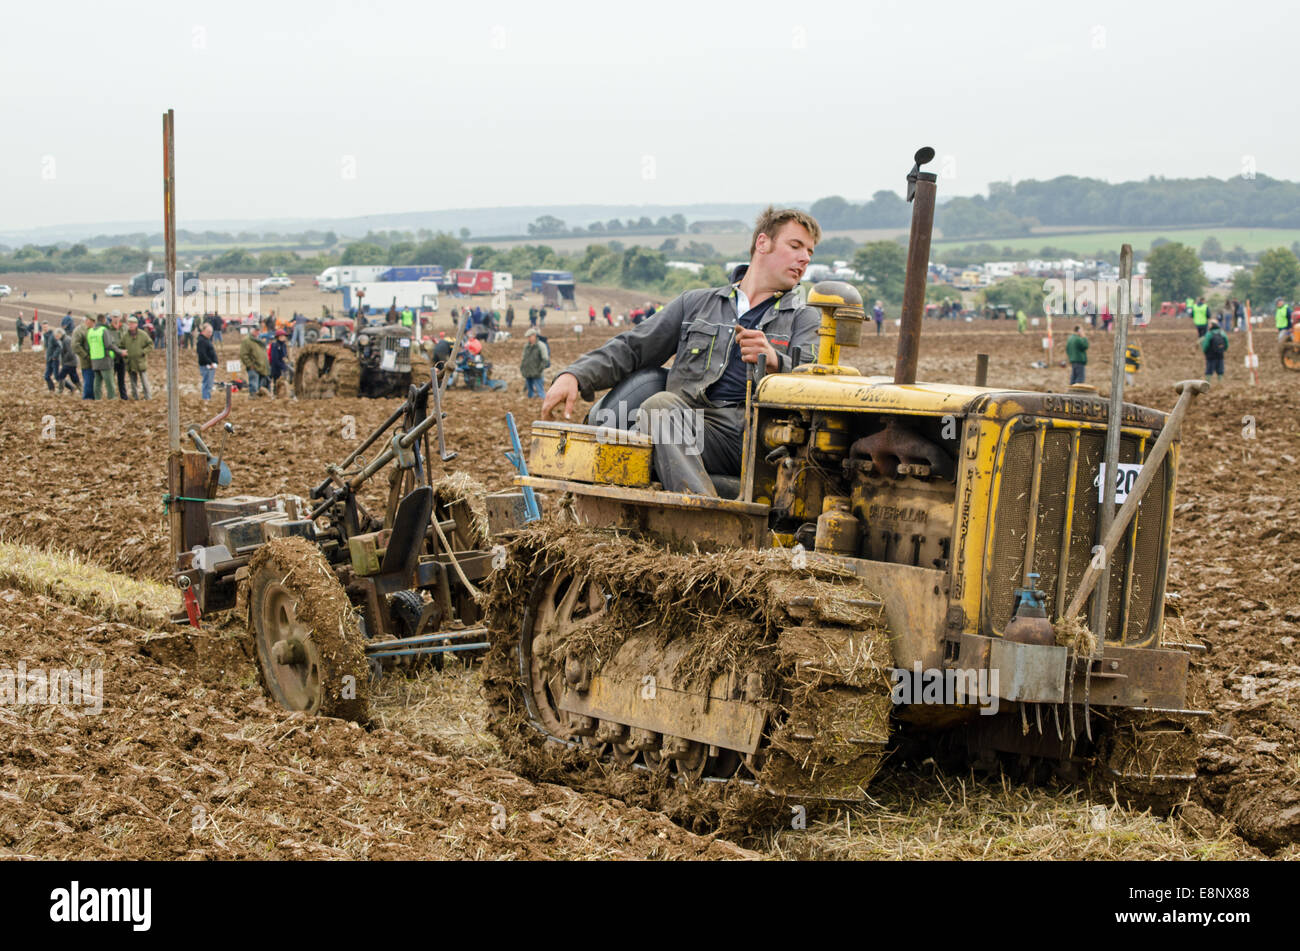 BASINGSTOKE, UK  OCTOBER 12, 2014: John Crowder about to win the crawler tractor class,  British National Ploughing Championship Stock Photo